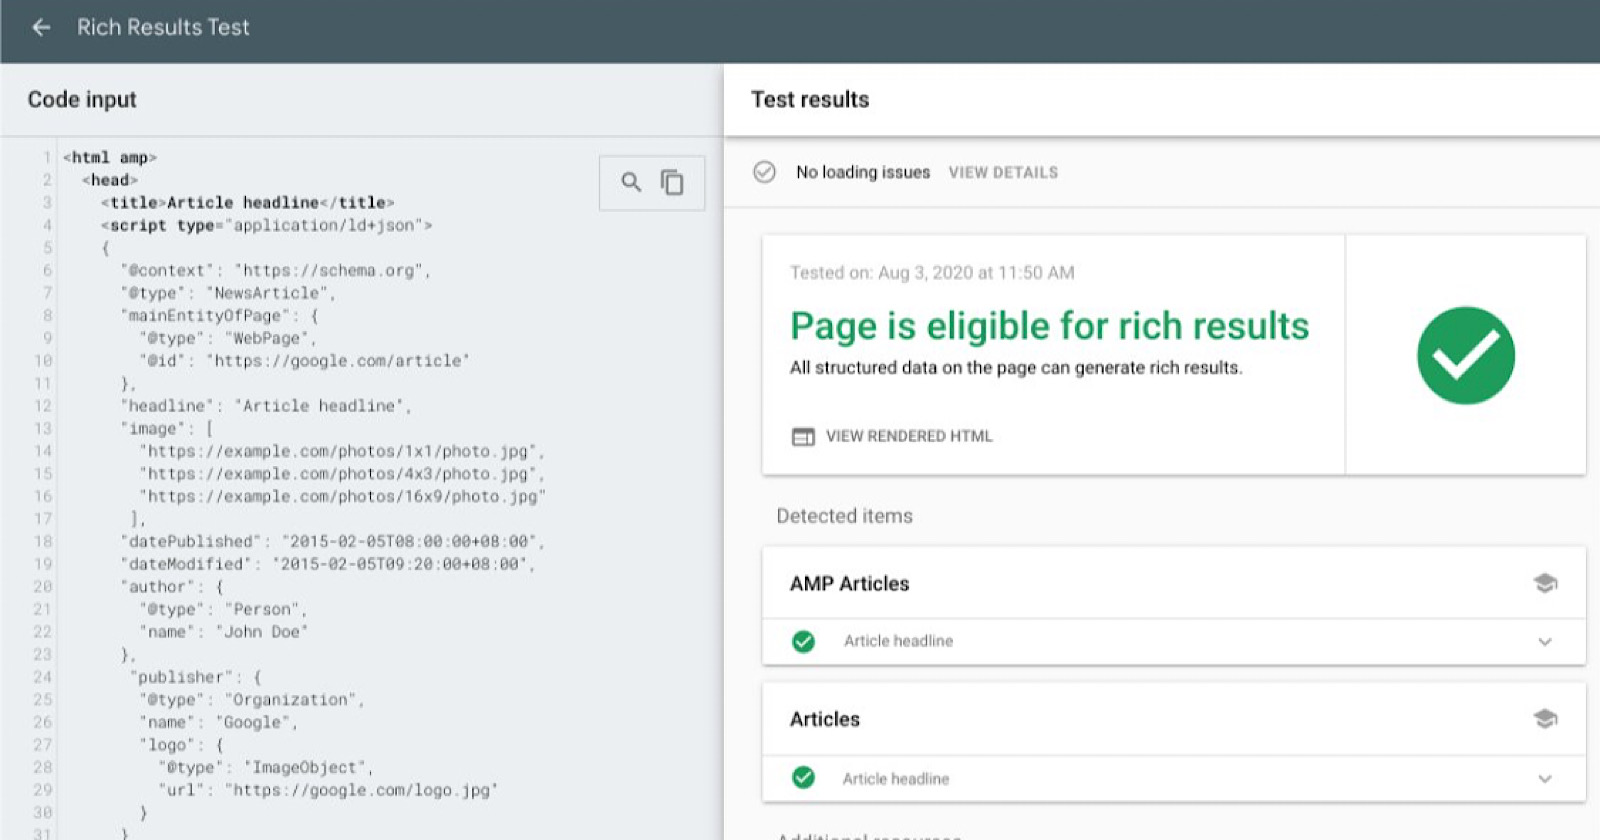 Google’s Rich Results Test Tool Supports ‘Article’ Markup